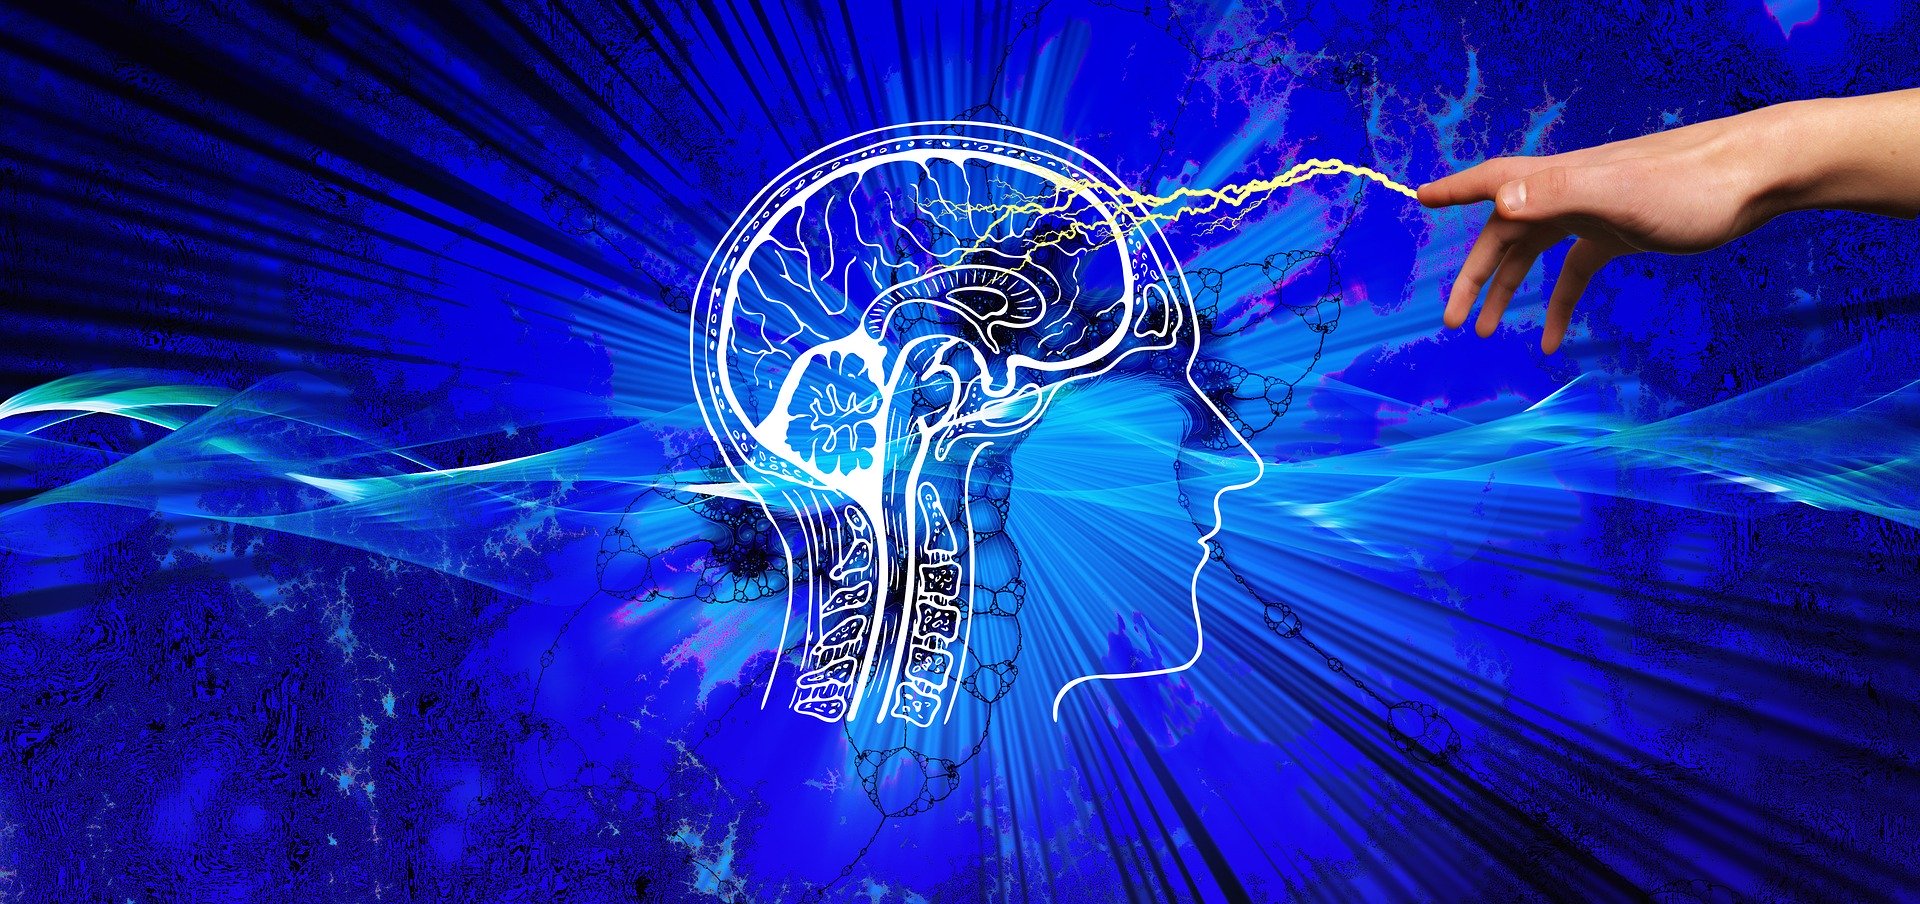 A digital illustration of a human brain outlined in white, with electric-like currents connecting it to an outstretched hand. The vibrant blue background adorned with abstract lines and patterns evokes a futuristic atmosphere, echoing the cutting-edge PTSD treatment at Khiron Clinics.